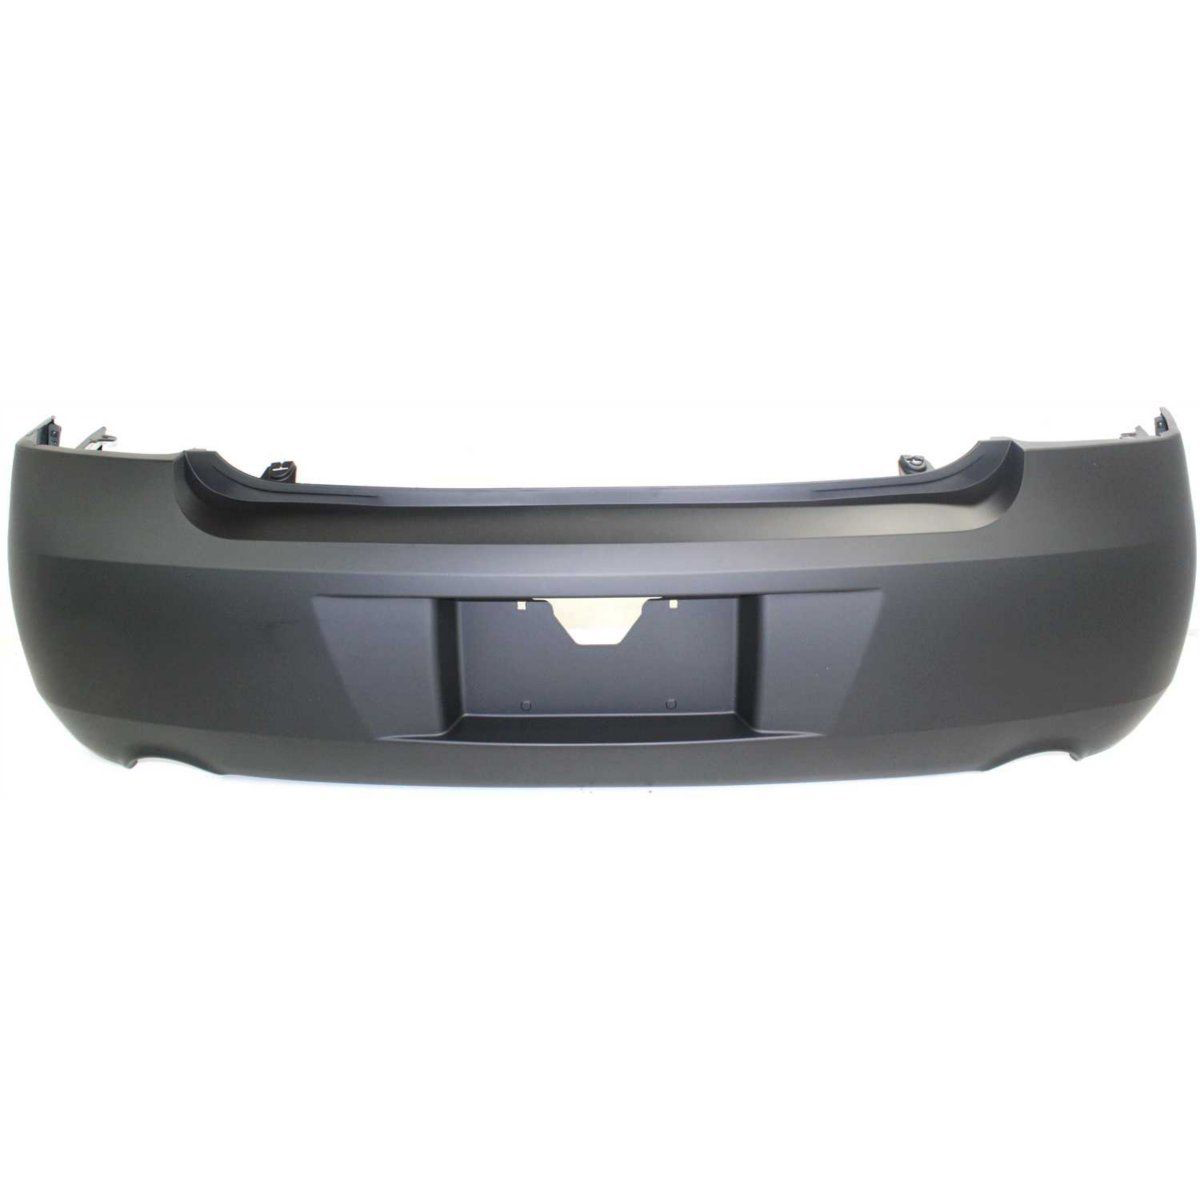 2006-2016 CHEVY IMPALA Rear Bumper Cover Dual Exhaust Painted to Match